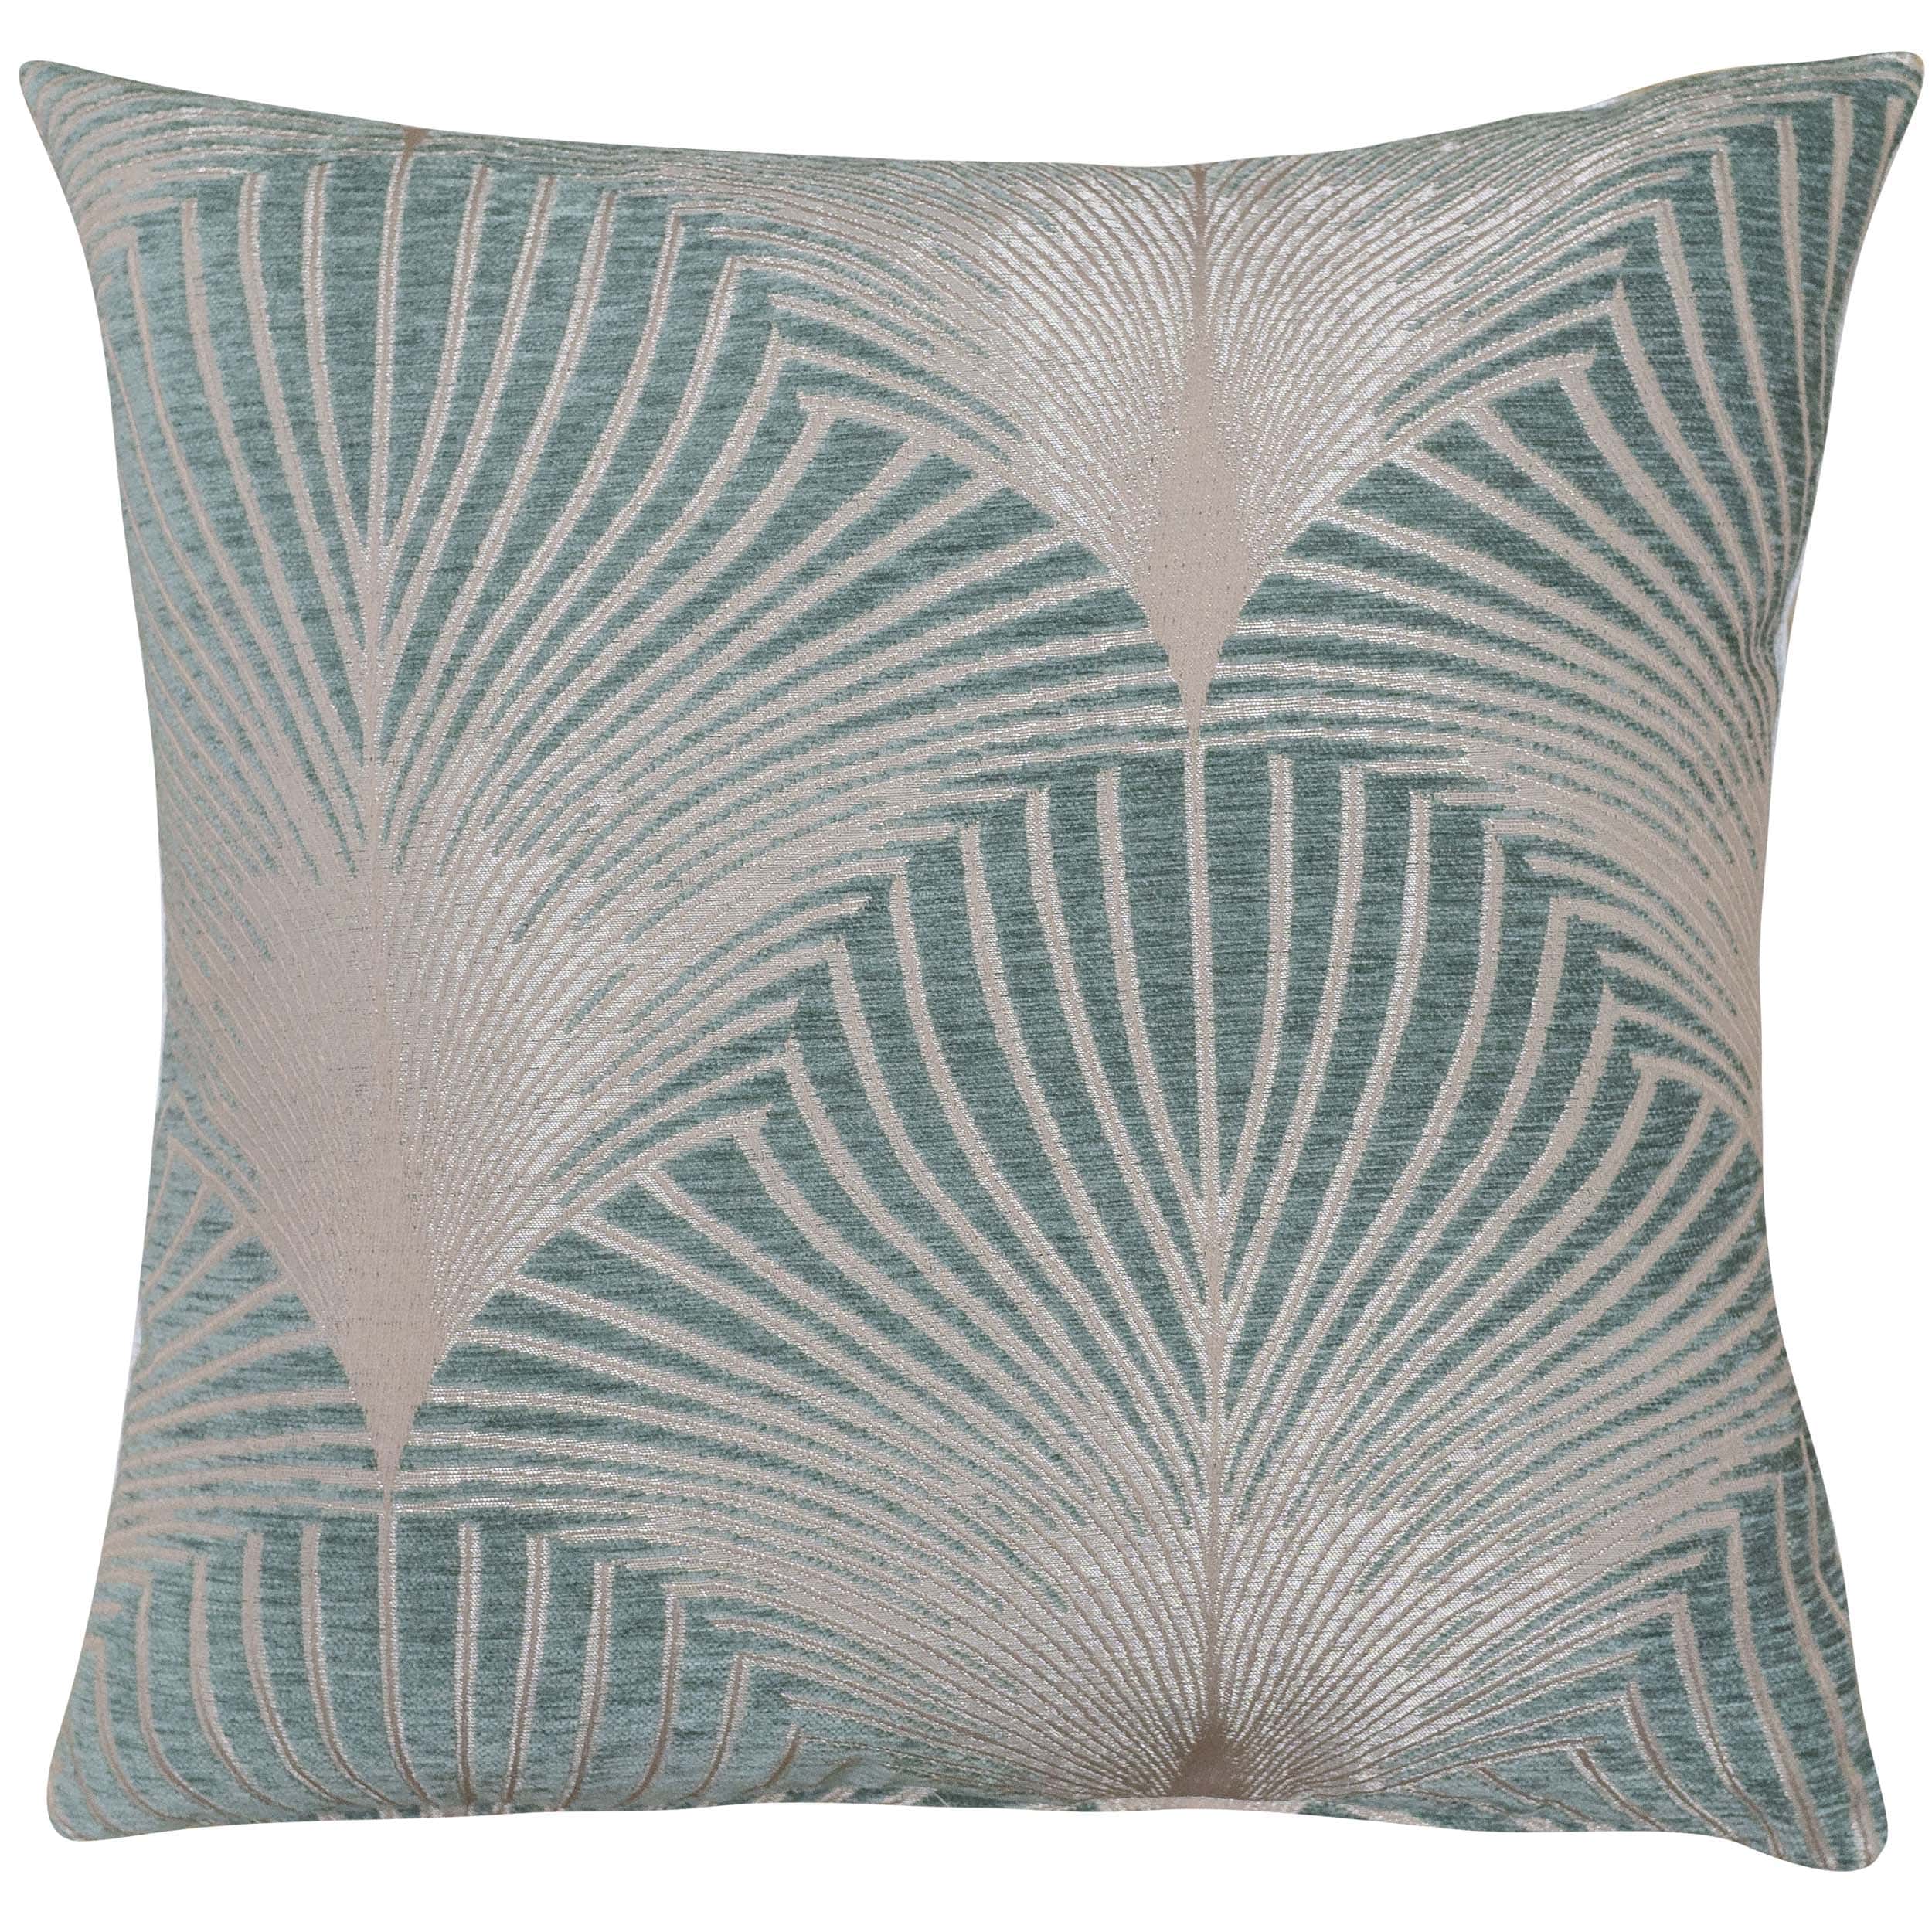 Art Deco Fan Cushion in Duck Egg Blue and Natural